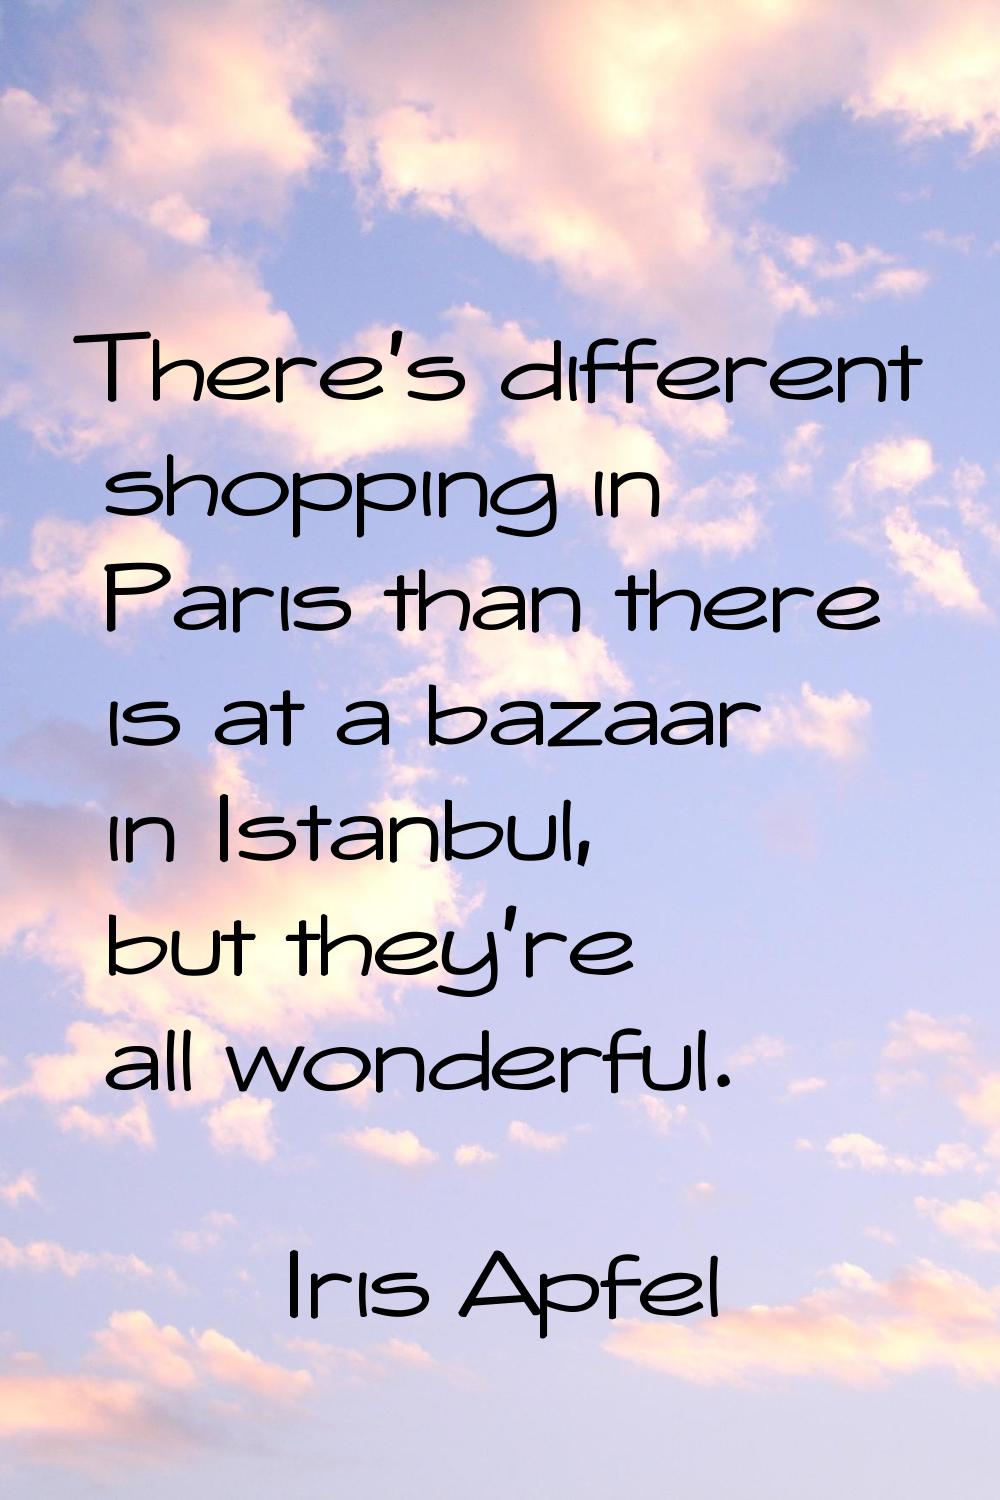 There's different shopping in Paris than there is at a bazaar in Istanbul, but they're all wonderfu